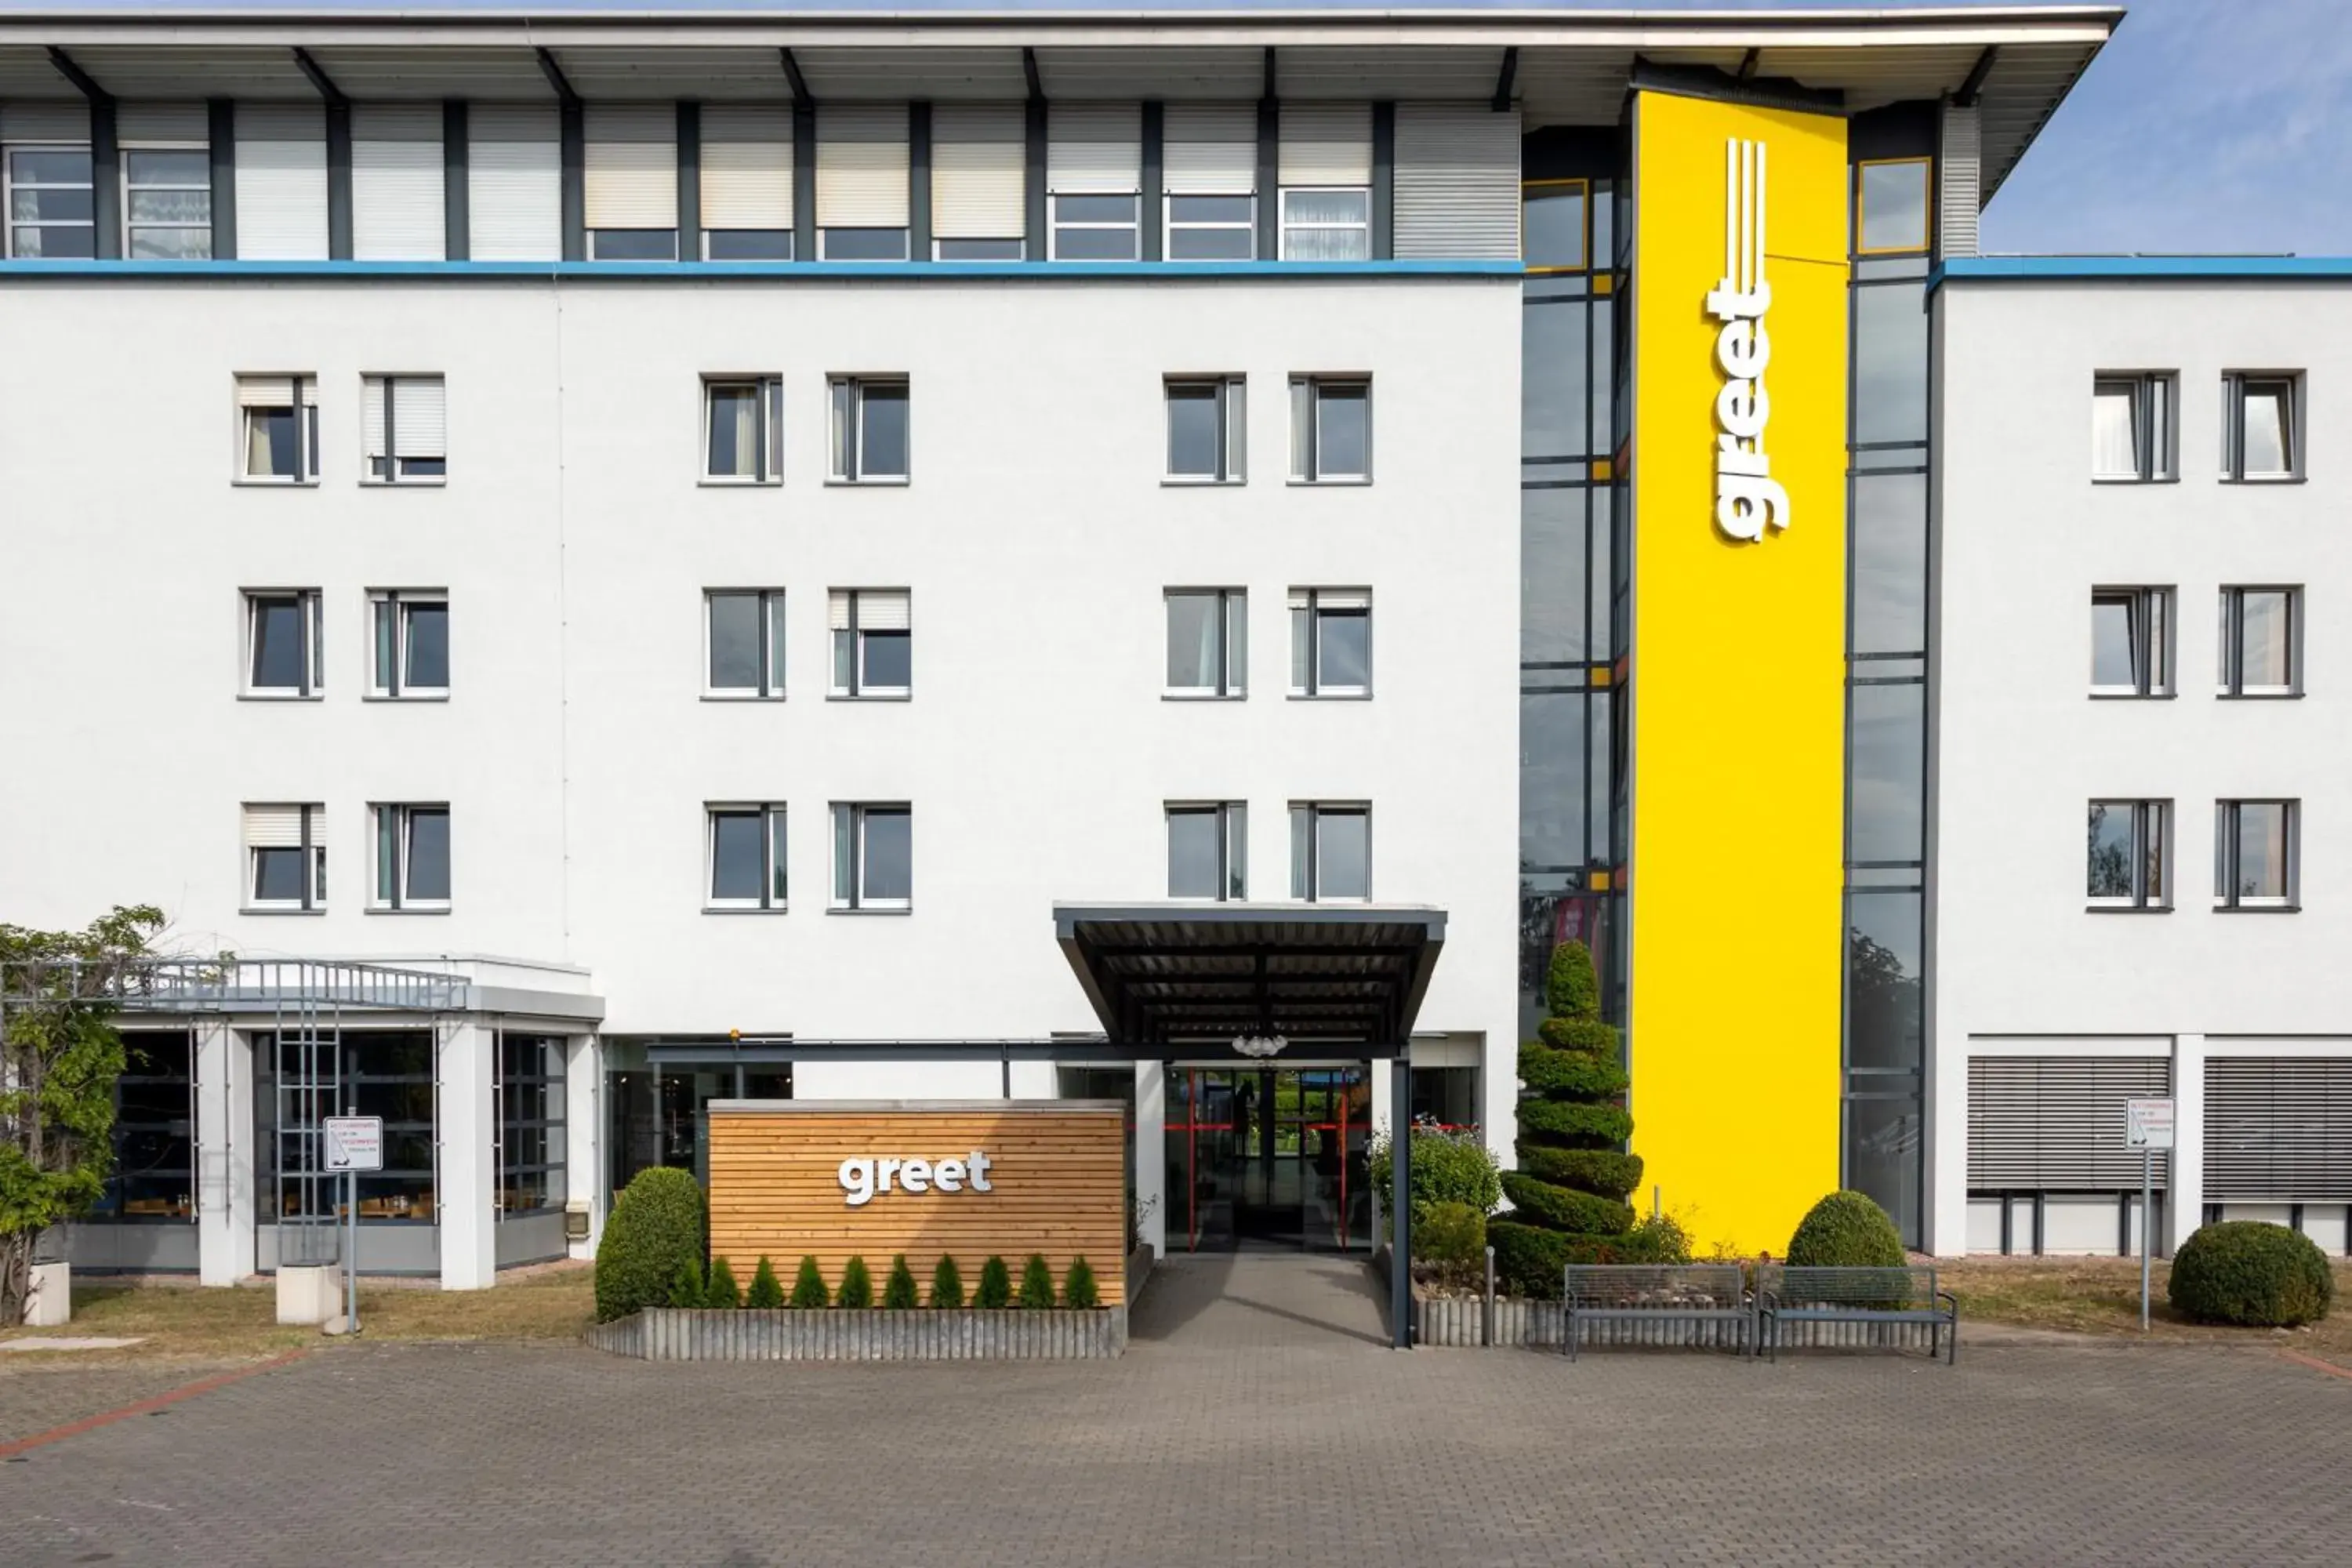 Property Building in The Hotel Darmstadt